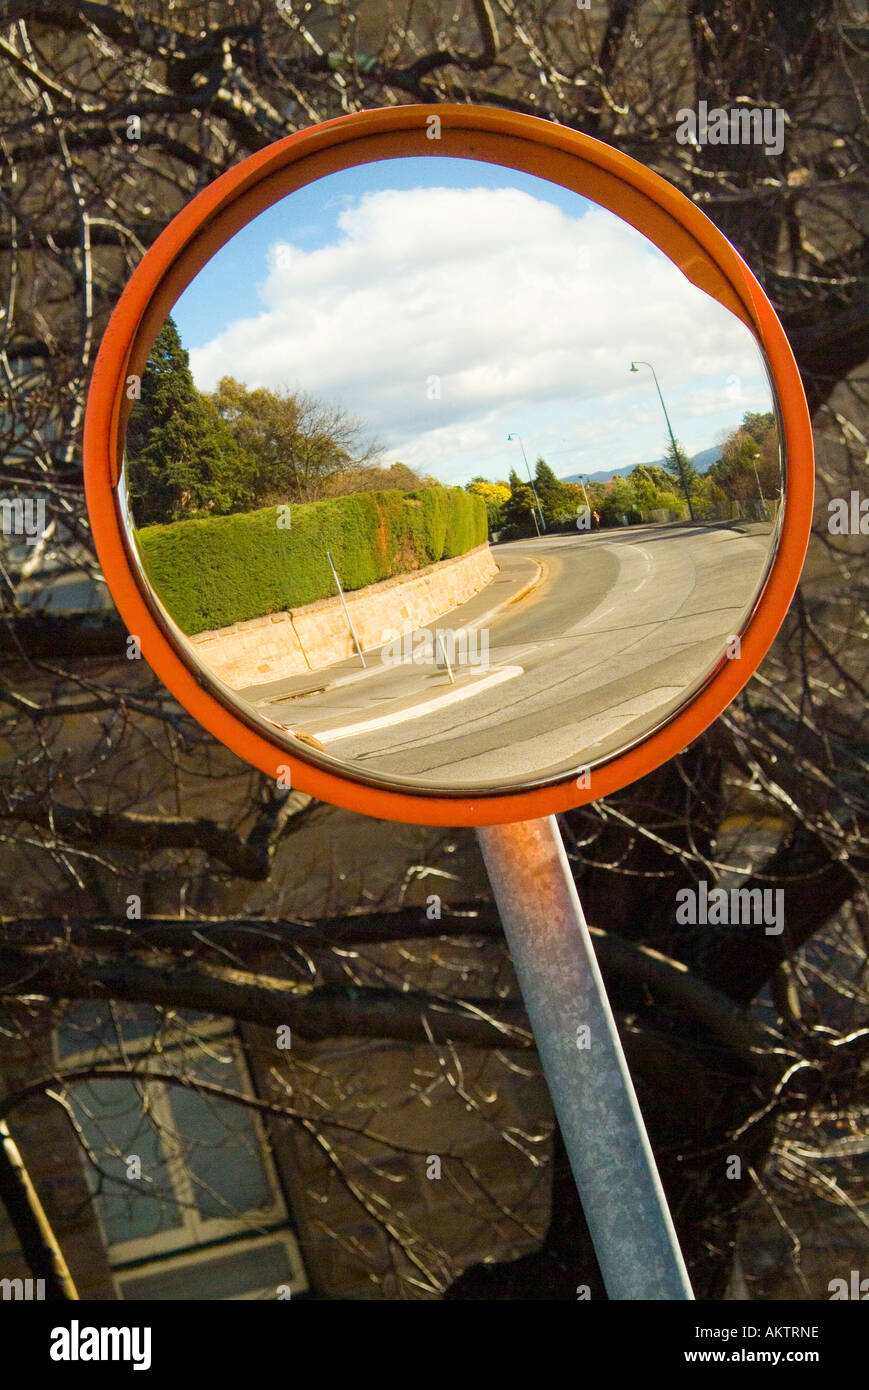 A convex mirror used to see around a blind corner Stock Photo